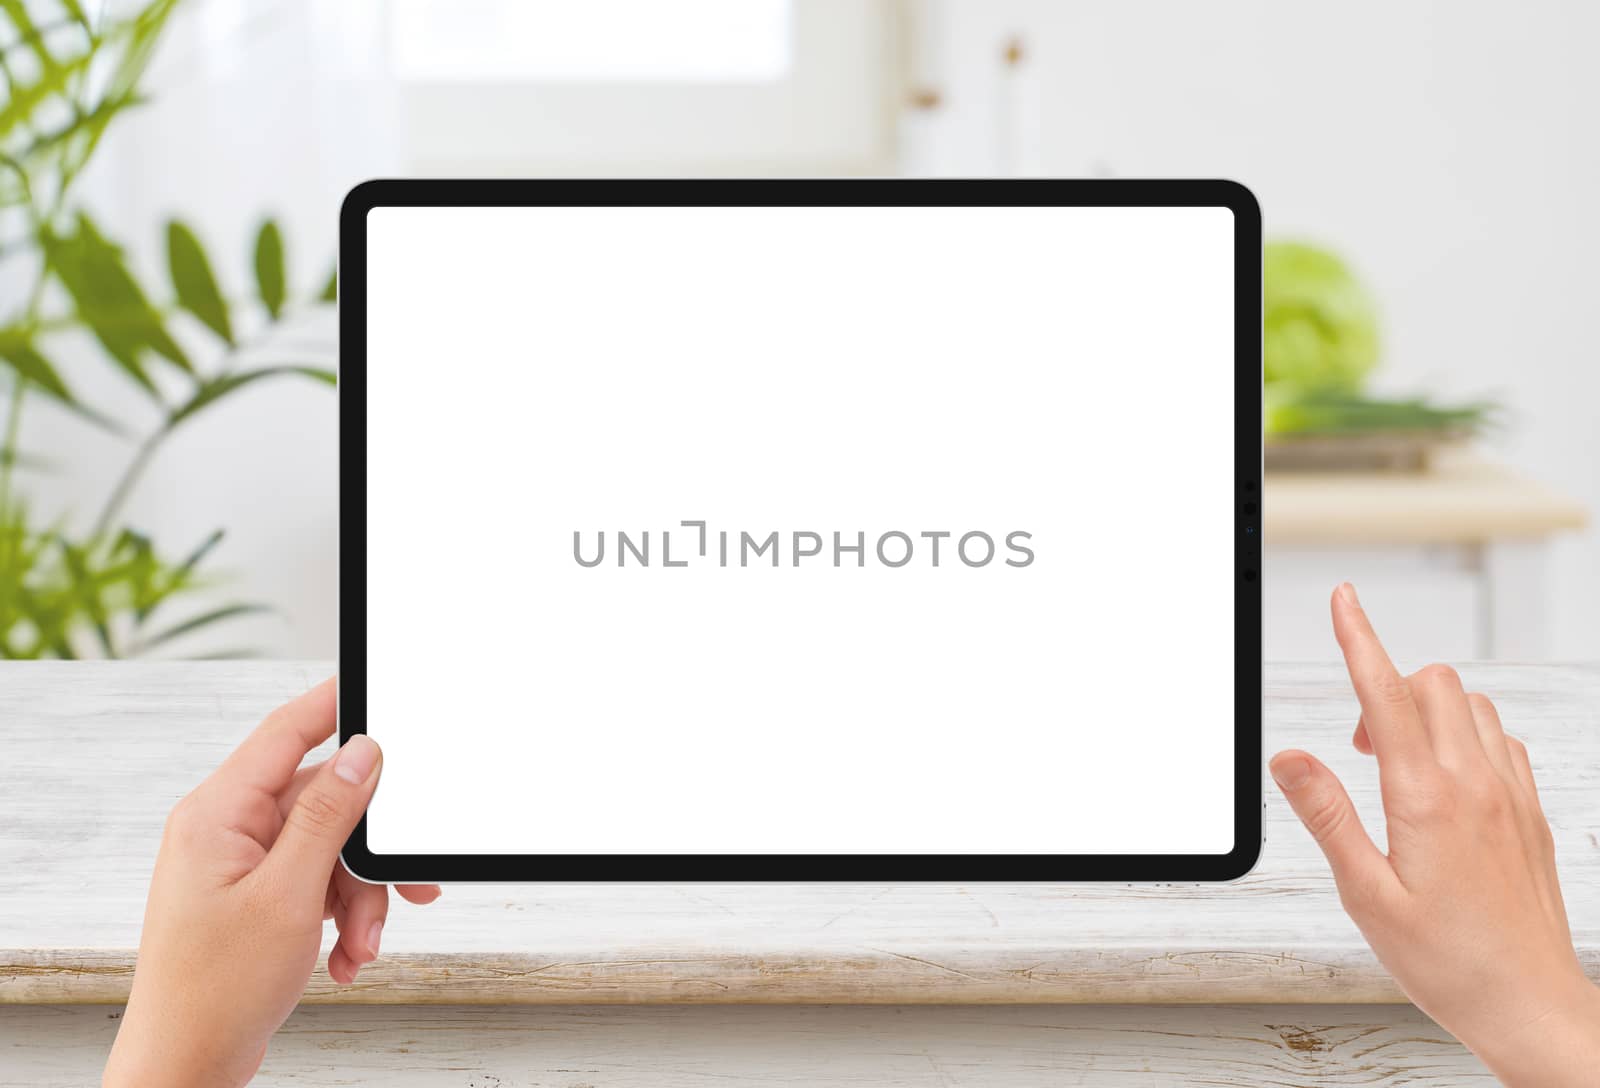 Isolated human left hand holding black tablet media device with white empty screen mockup and wooden table in kitchen